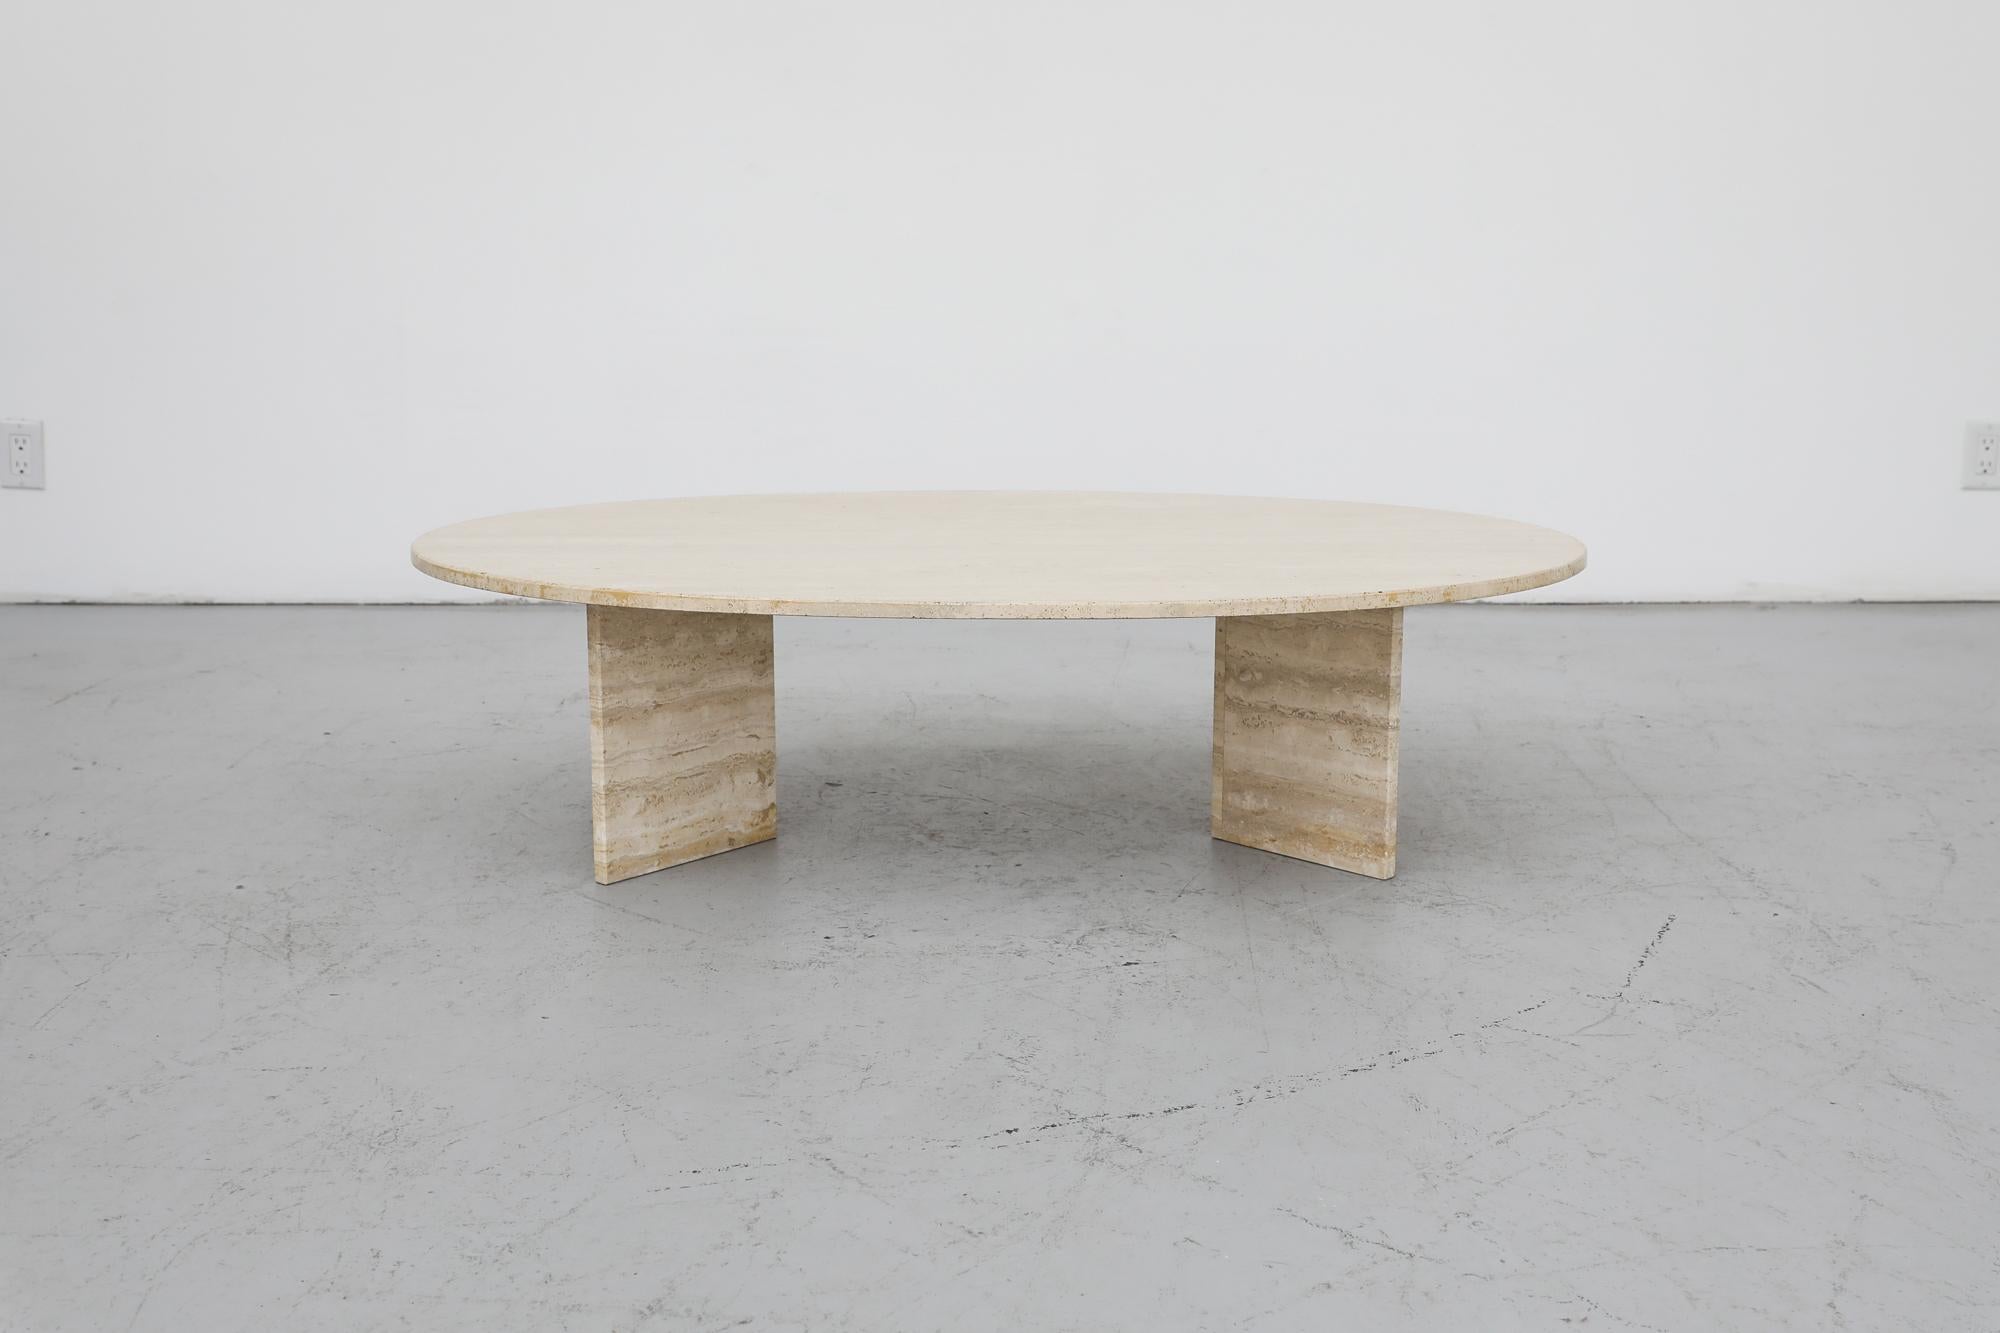 This Mid-Century solid oval travertine coffee table has an elegant Post Modern design. The heavy oval top sits loose on two v-shaped legs of the same material. One of the leg shows signs of previous repair. In original condition with visible wear